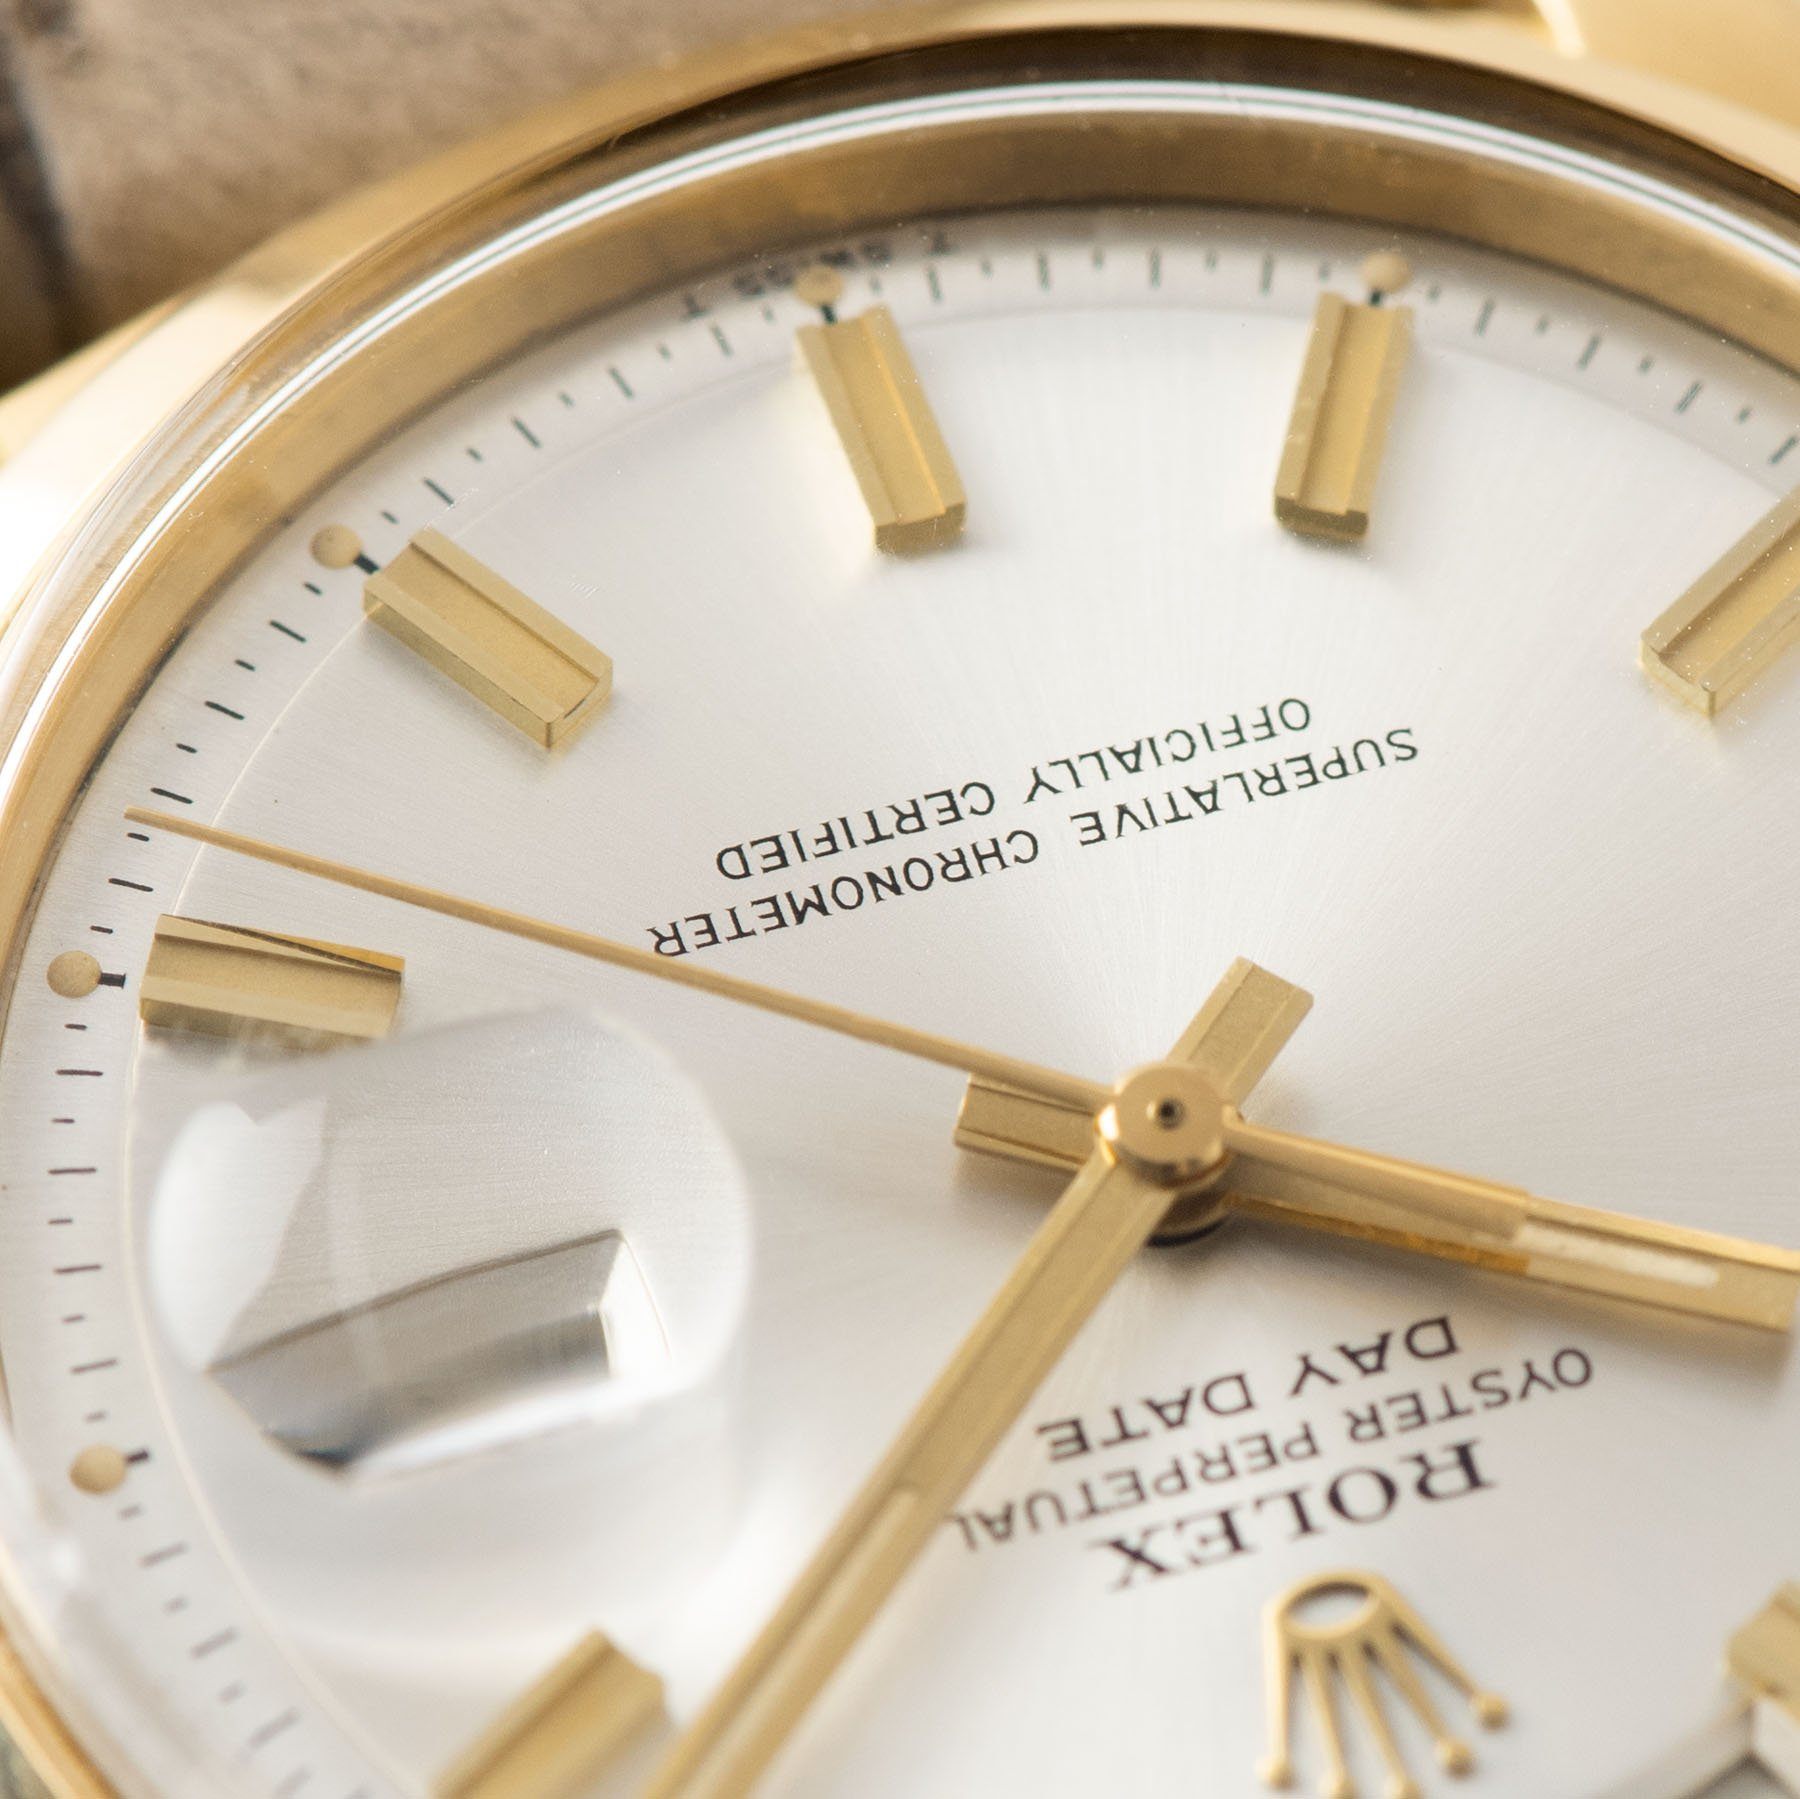 Rolex Day-Date Yellow Gold Wide Boy Dial 1802 , Details of the Wide Boy dial